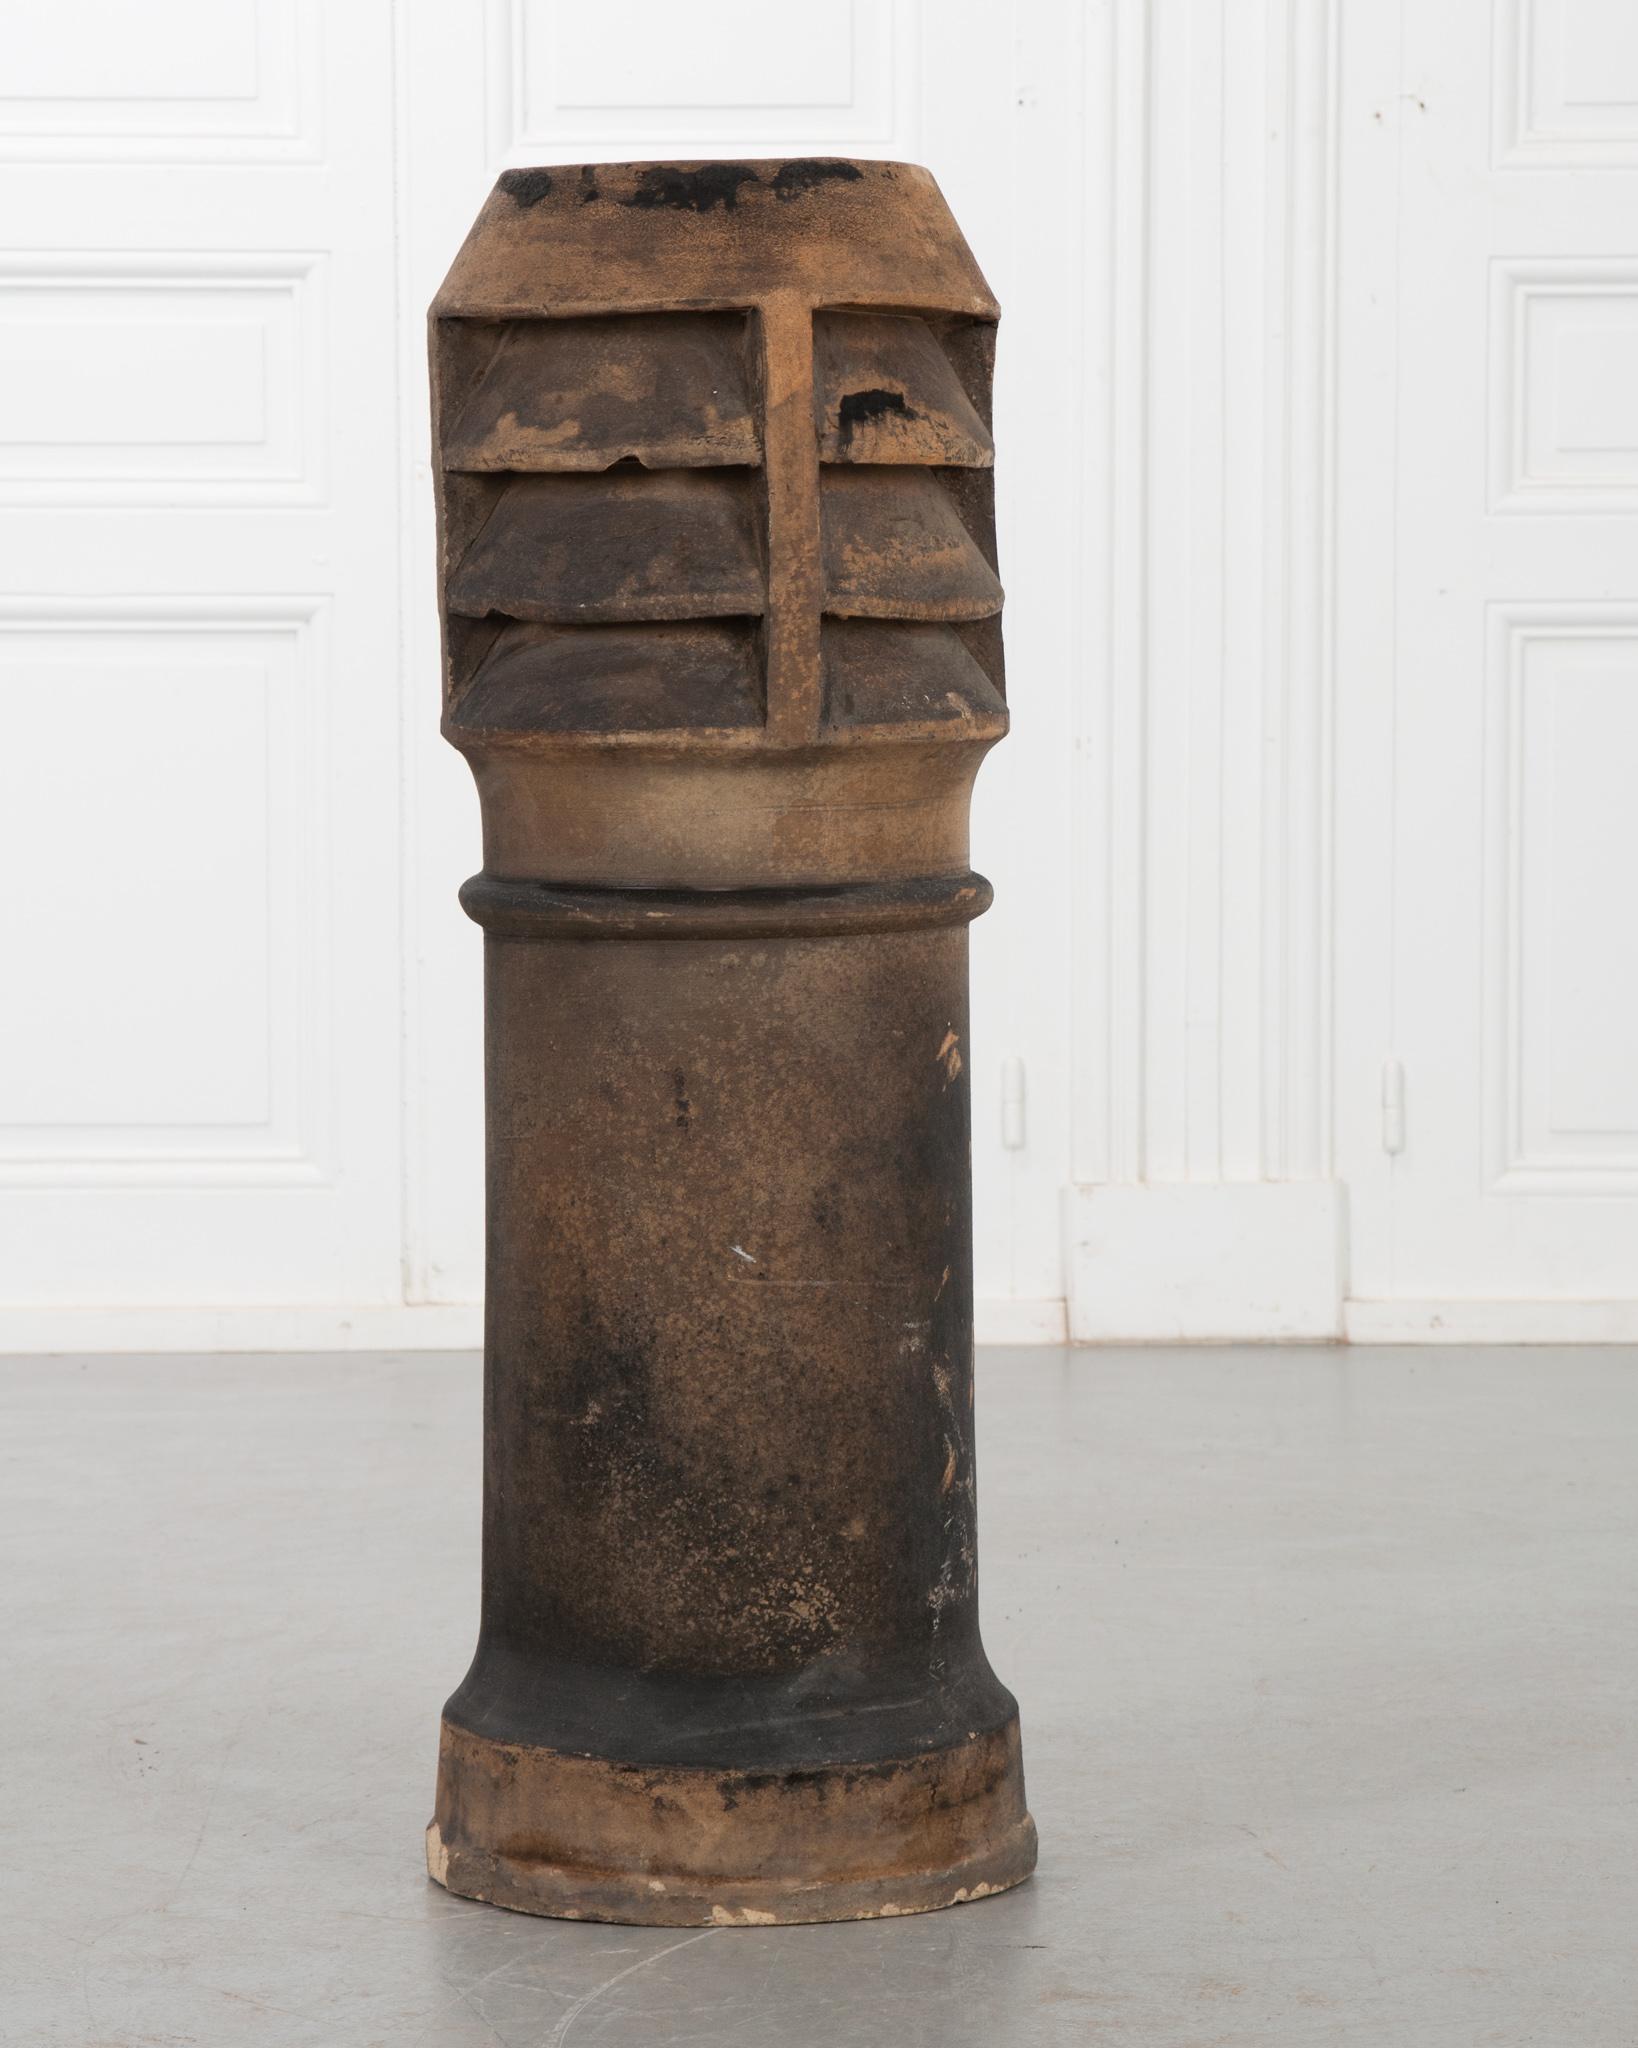 English Victorian Terracotta Chimney Pot For Sale at 1stDibs